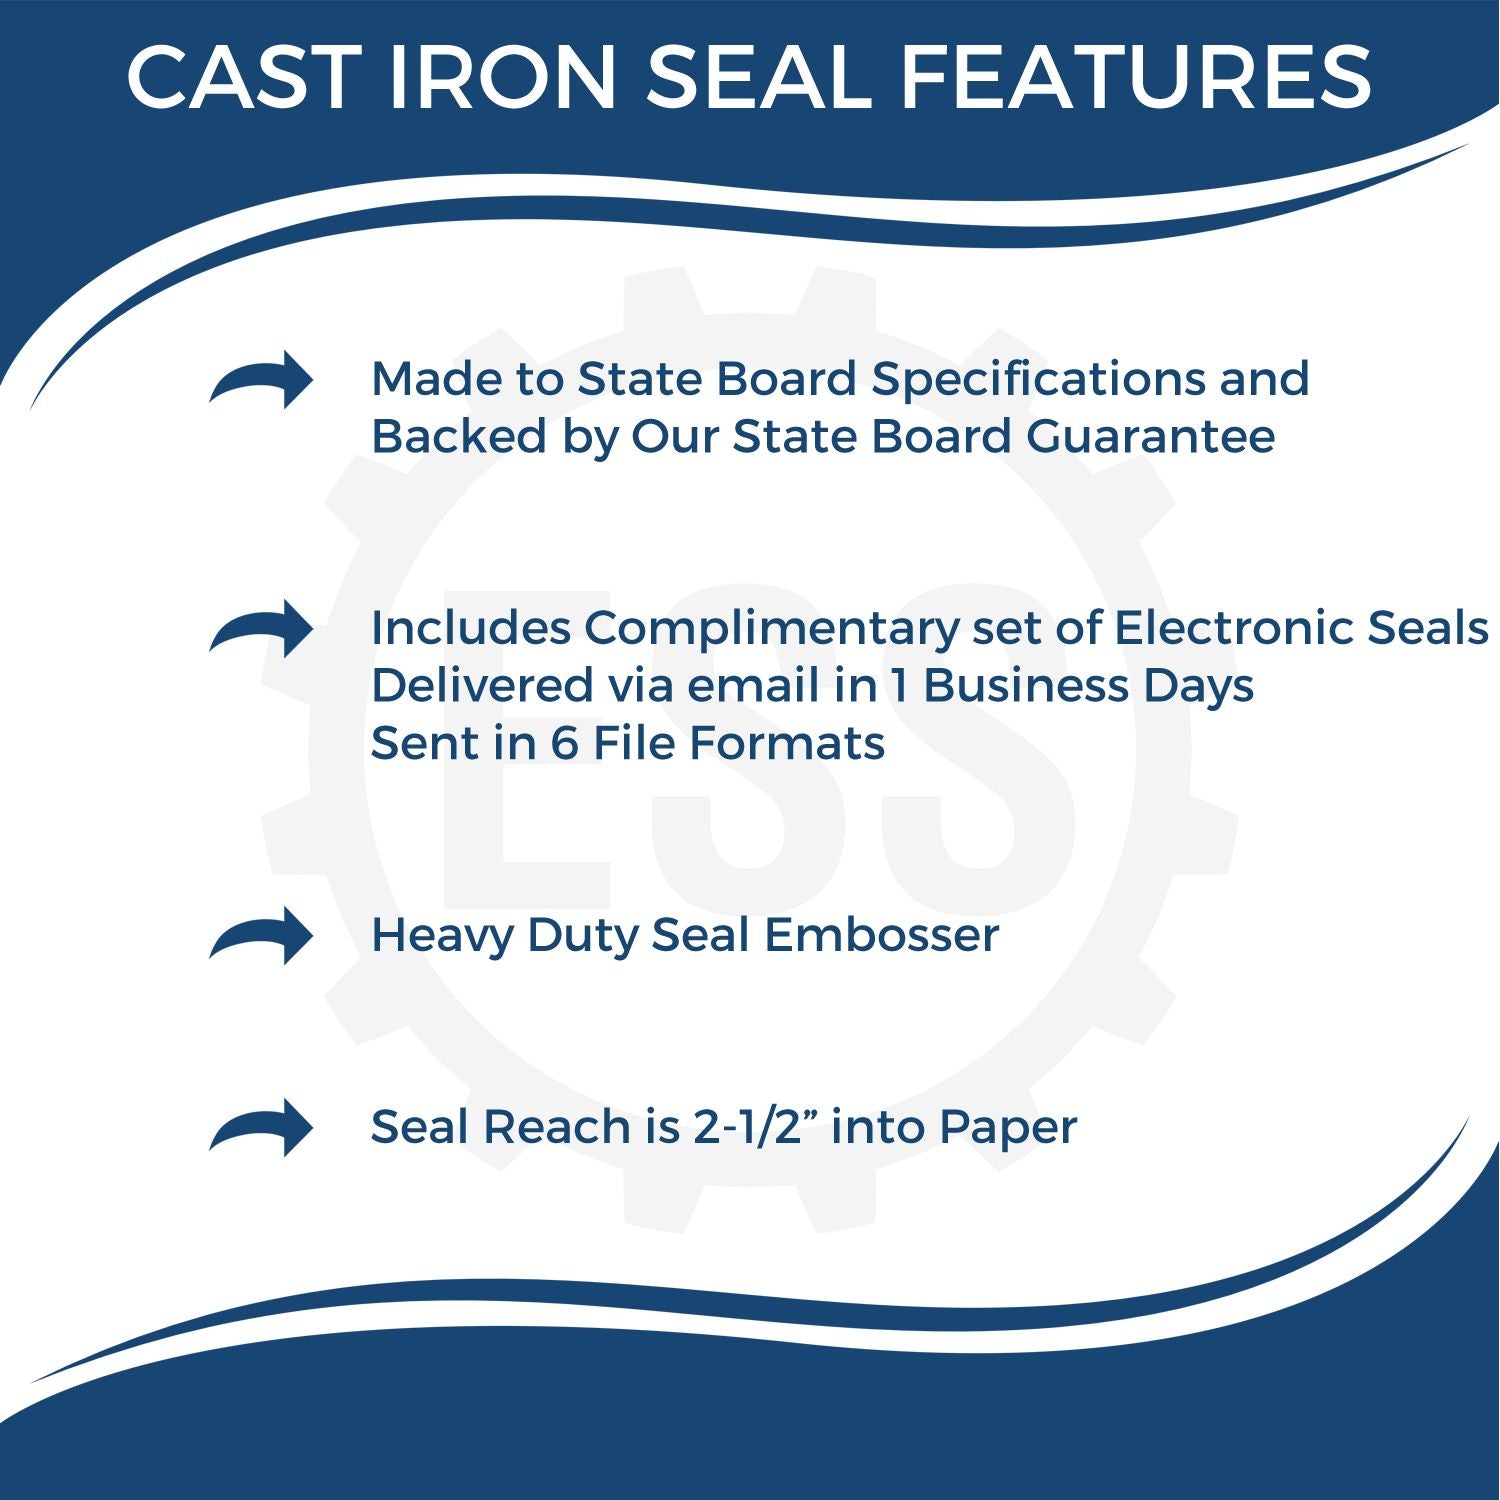 The main image for the Heavy Duty Cast Iron Arizona Engineer Seal Embosser depicting a sample of the imprint and electronic files